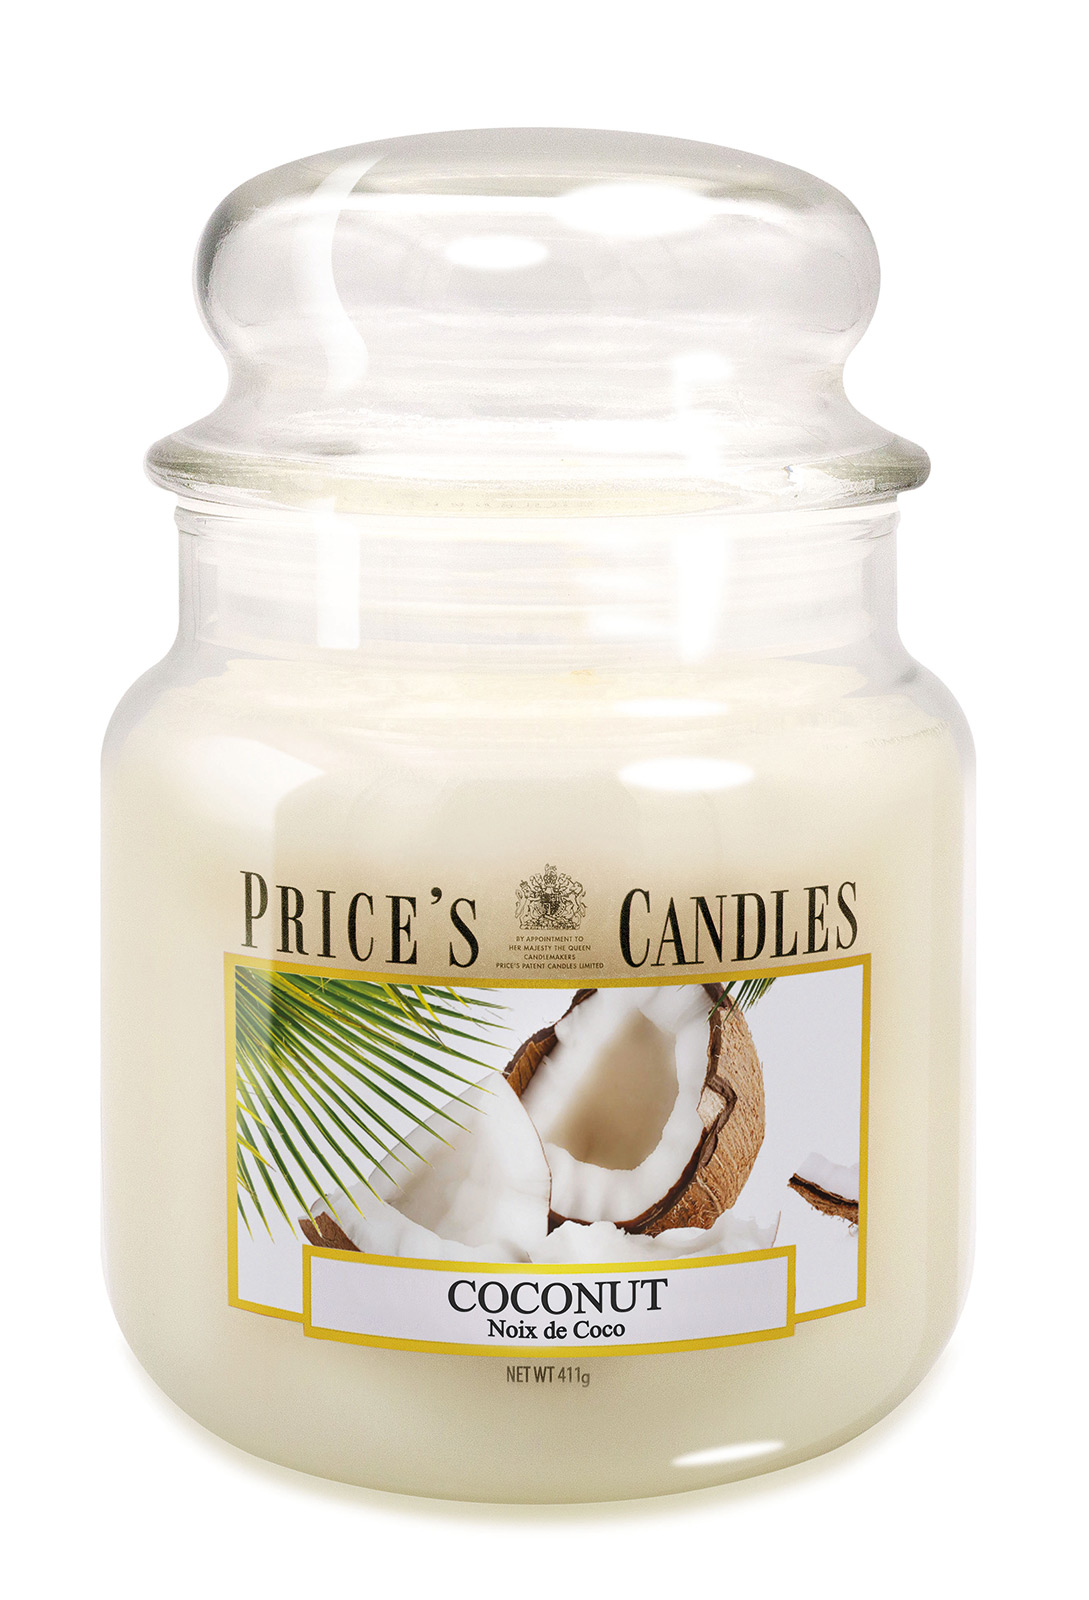 Prices Candle "Coconut" 411g 